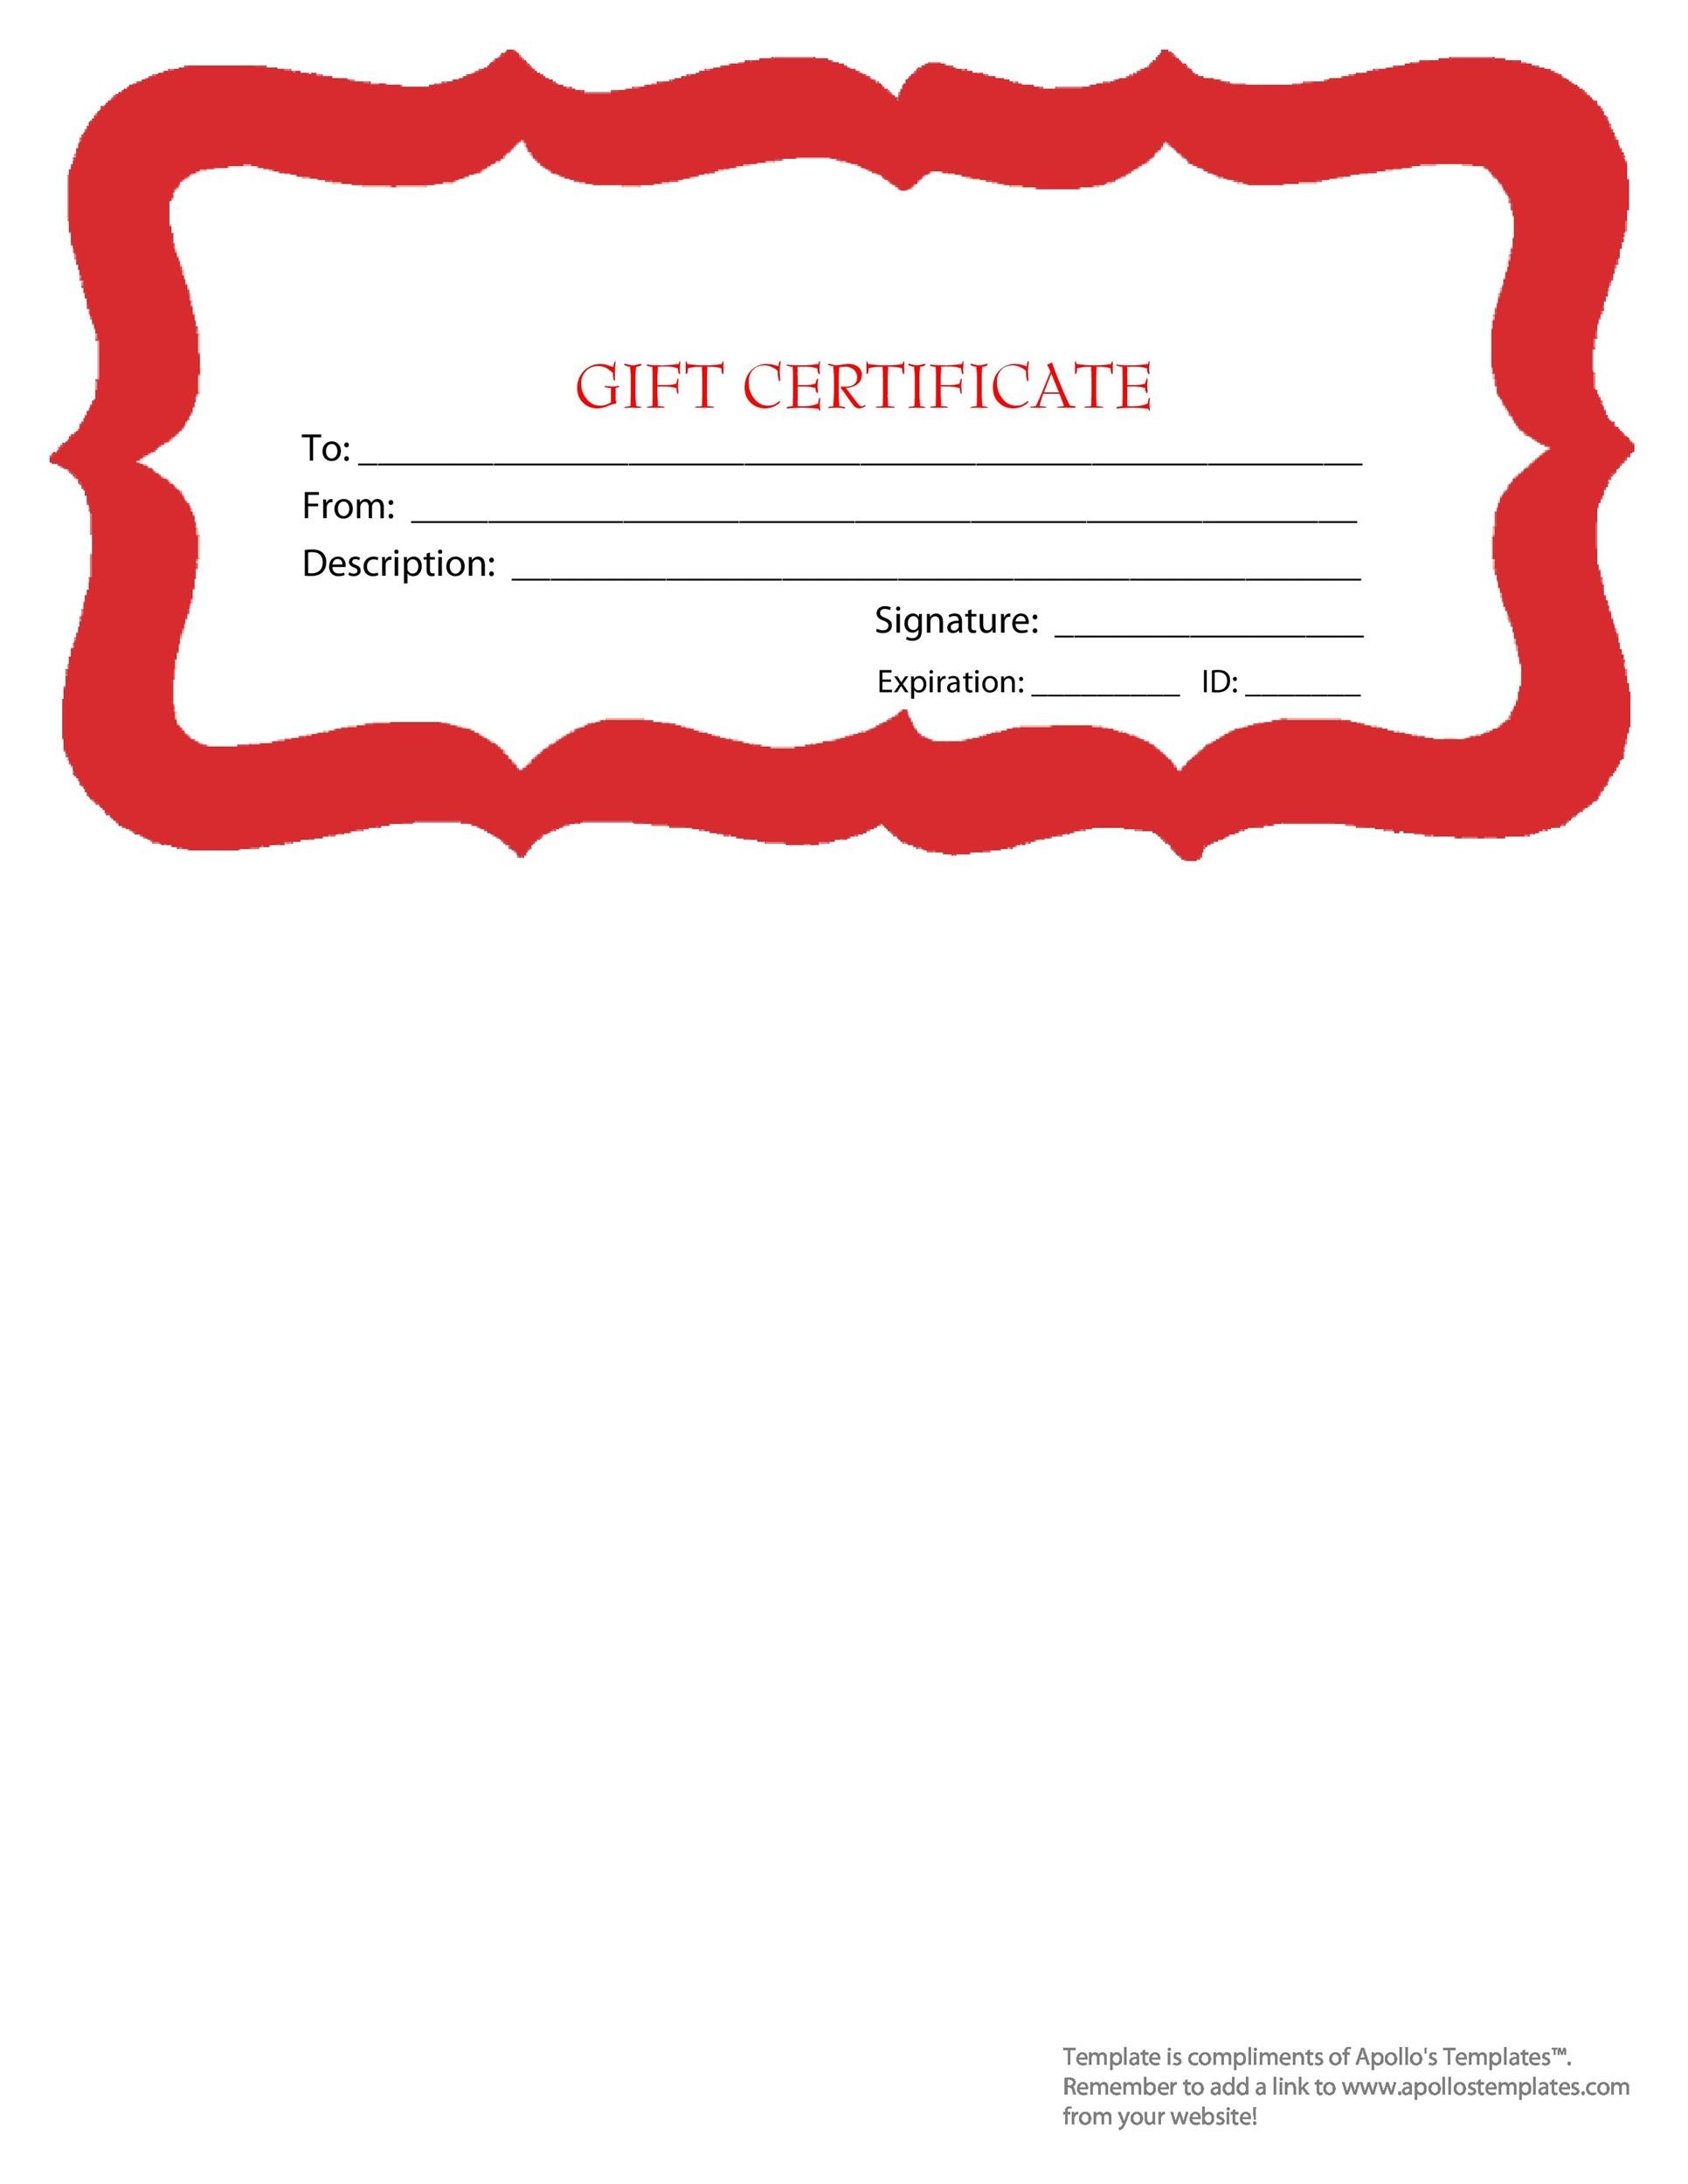 40-free-gift-certificate-templates-template-lab